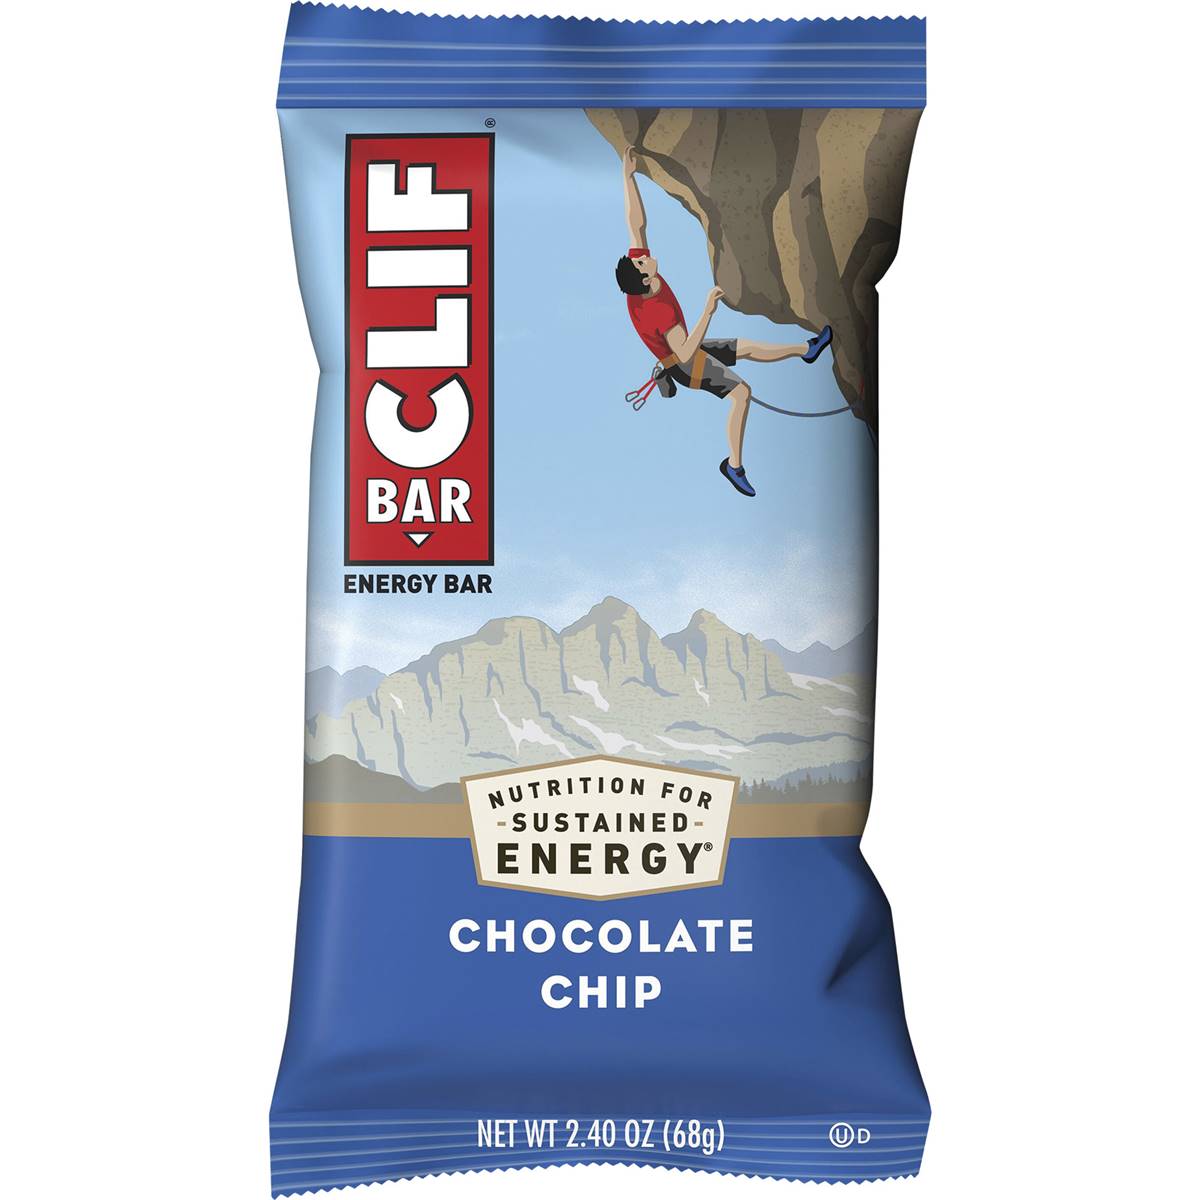 Calories in Clif Bar Energy Bar Chocolate Chip